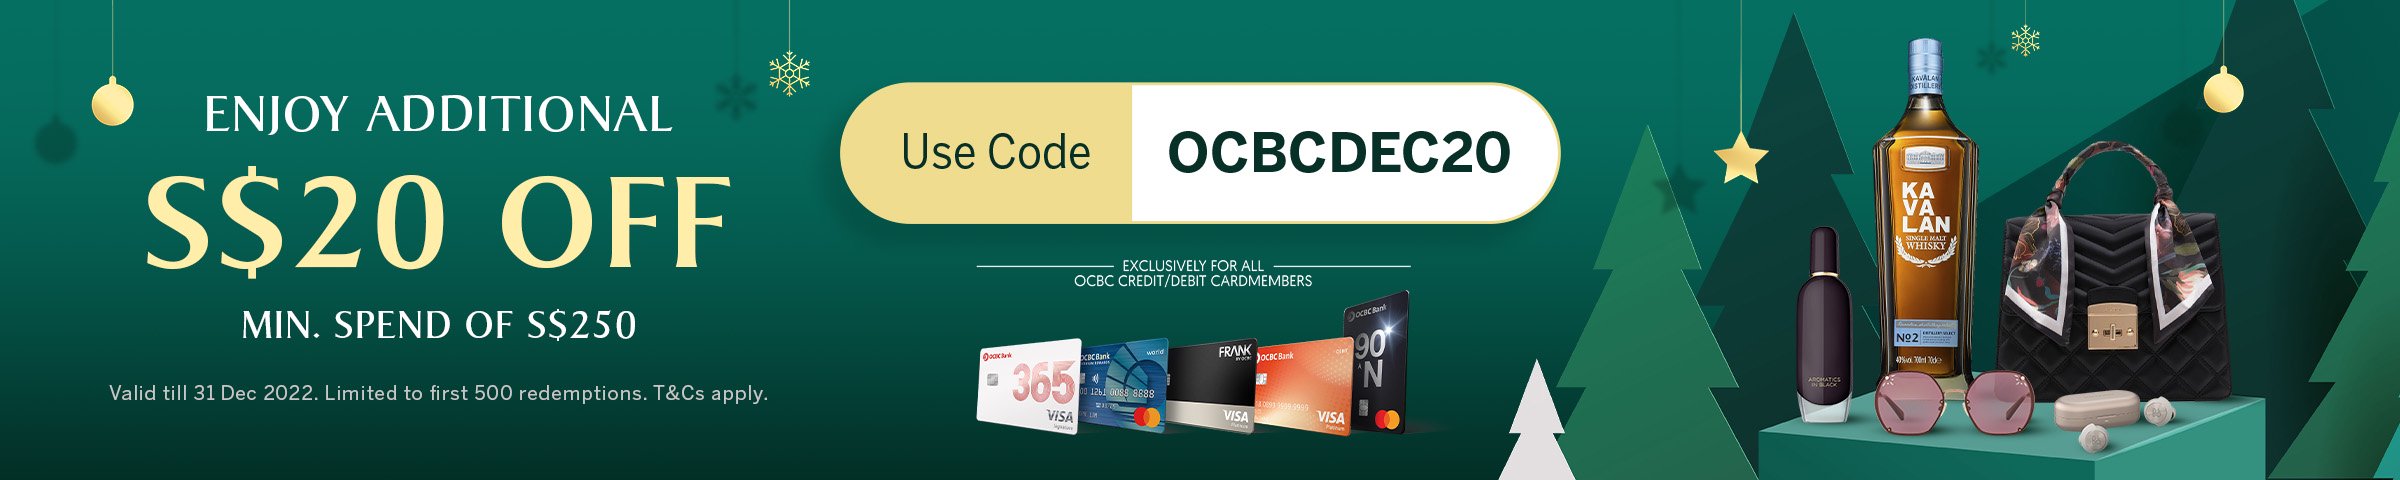 Exclusive Offer For OCBC Debit/Credit Cardmembers on KrisShop.com